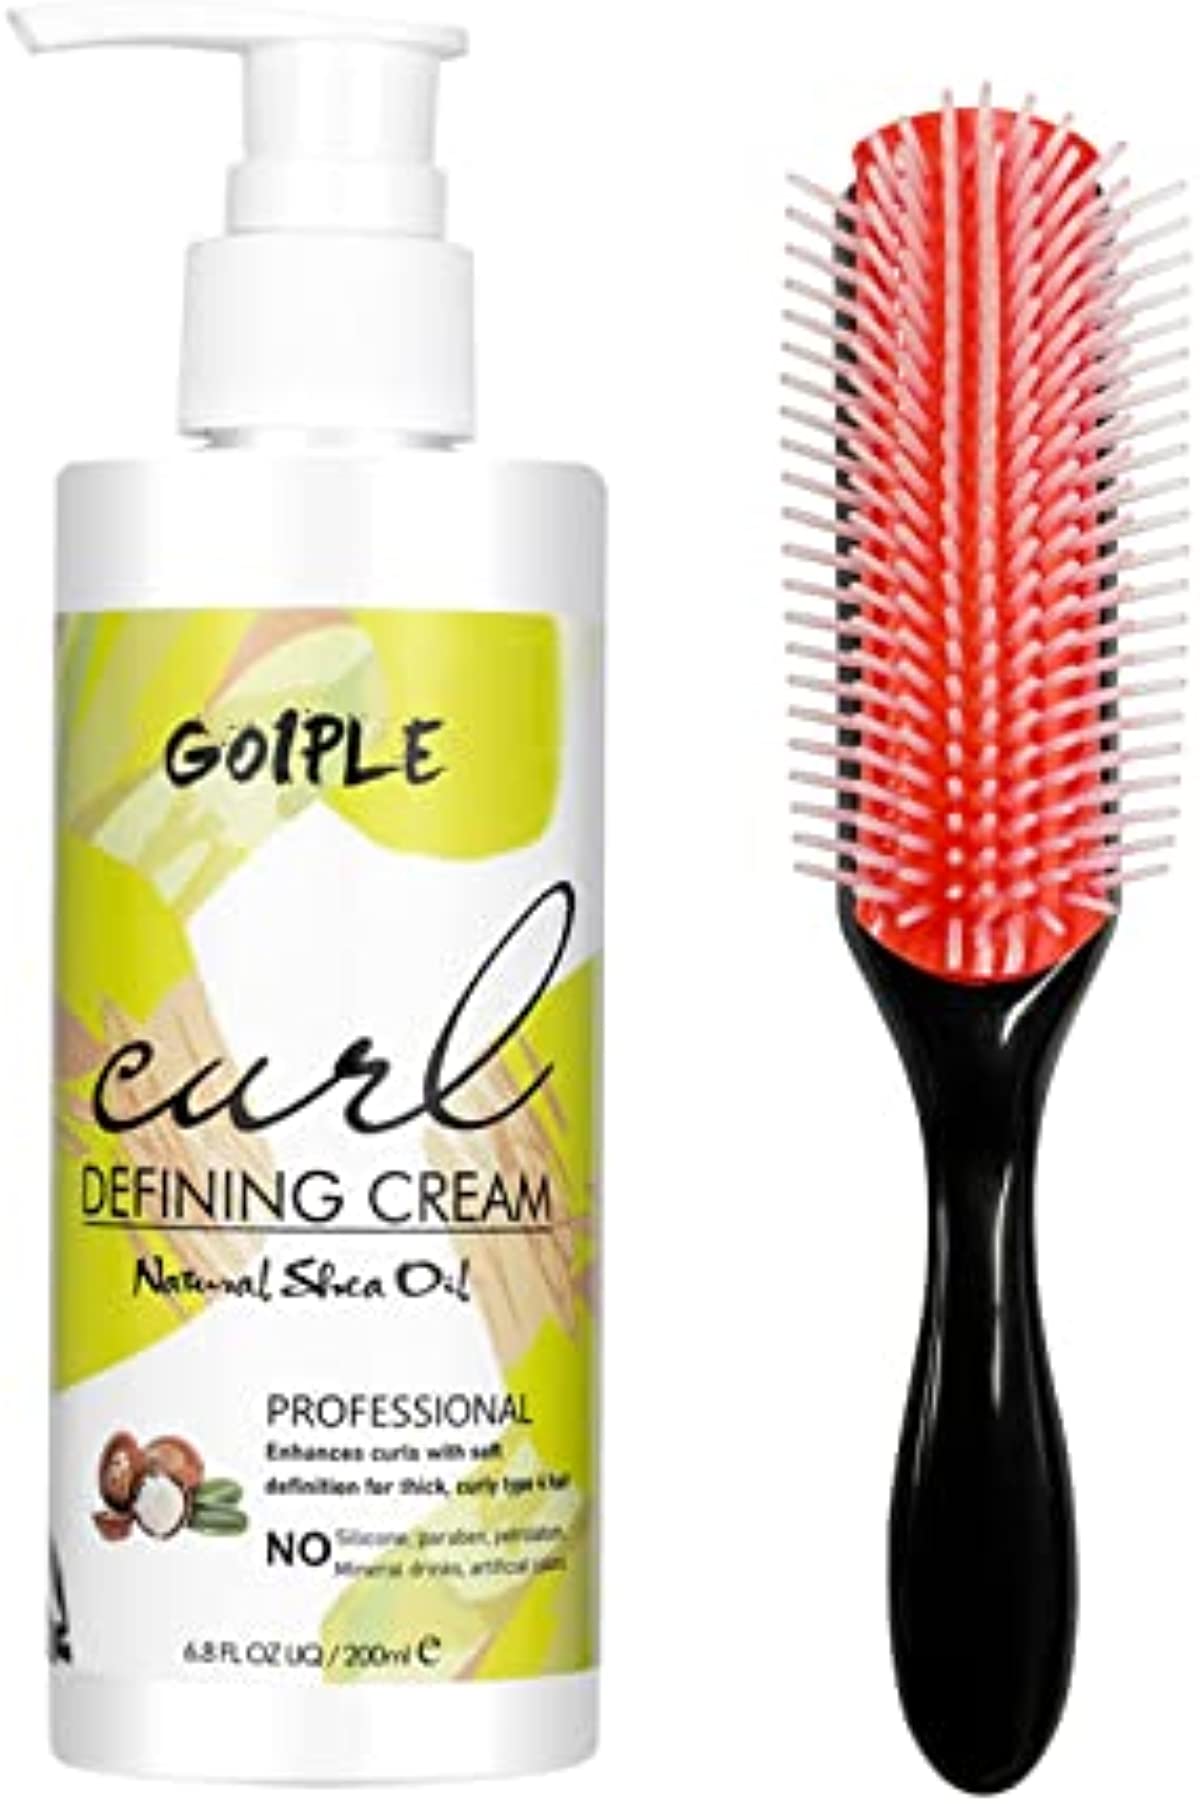 Curl Defining Cream for Curly Hair - Curling Perfection Wavy Hair Products Curl Cream, Hair-Smoothing Anti-Frizz Cream to Define All Natural Curl Types & Hair Textures with 9 Row Brush